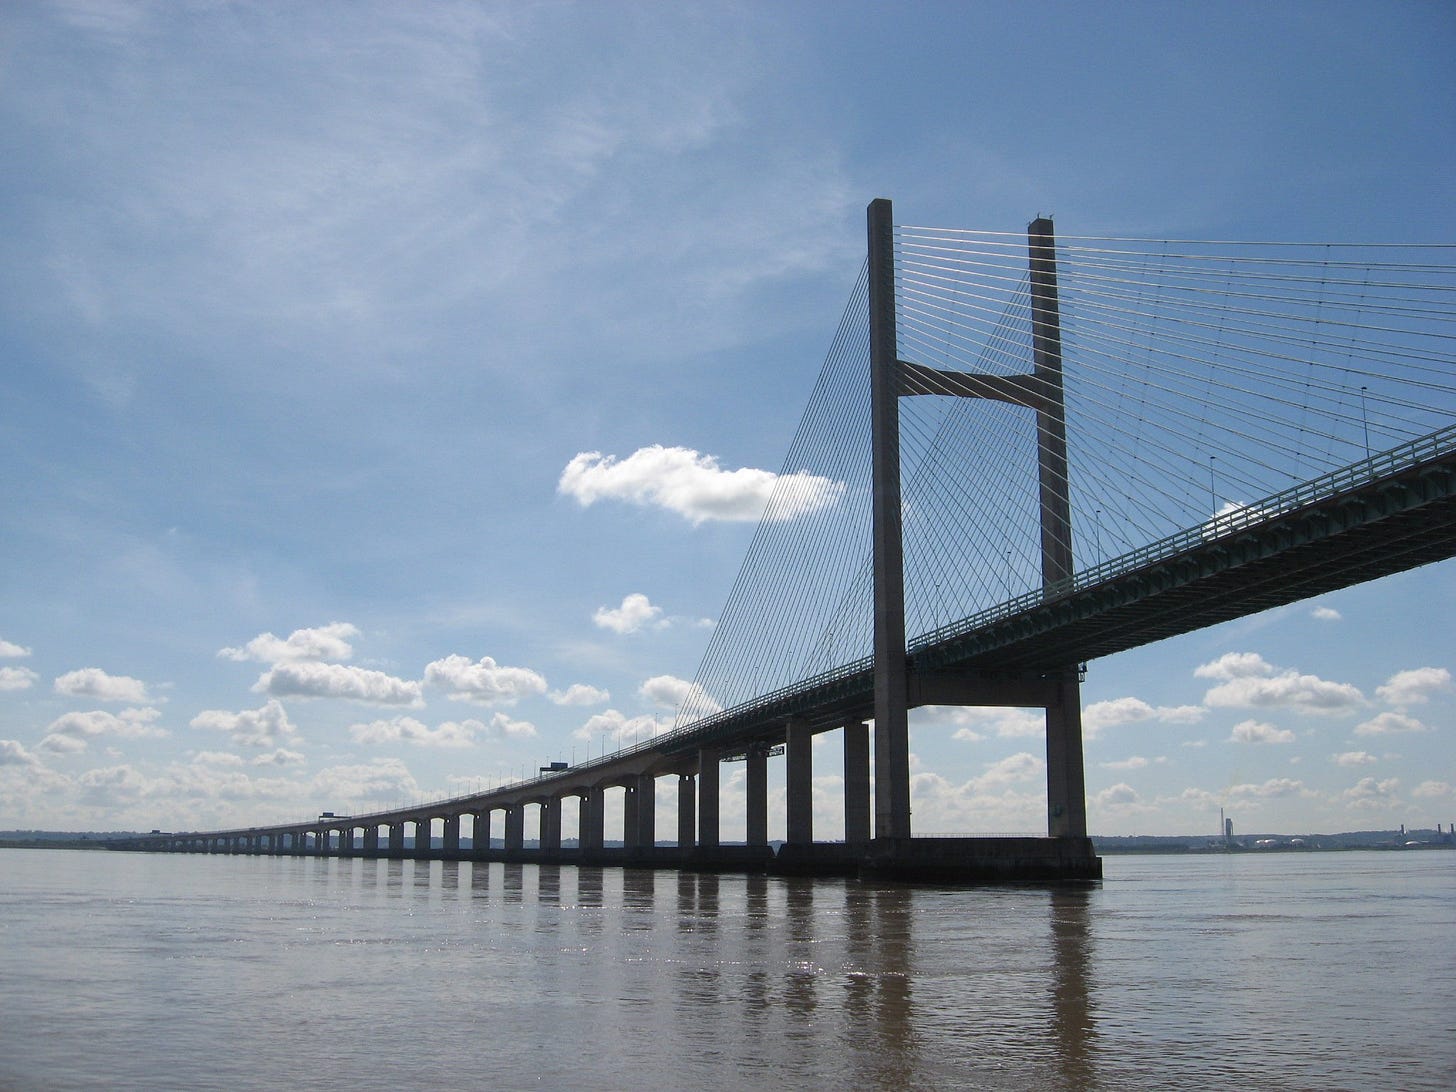 Photo of the Second Severn crossing (bridge) to illustrate post